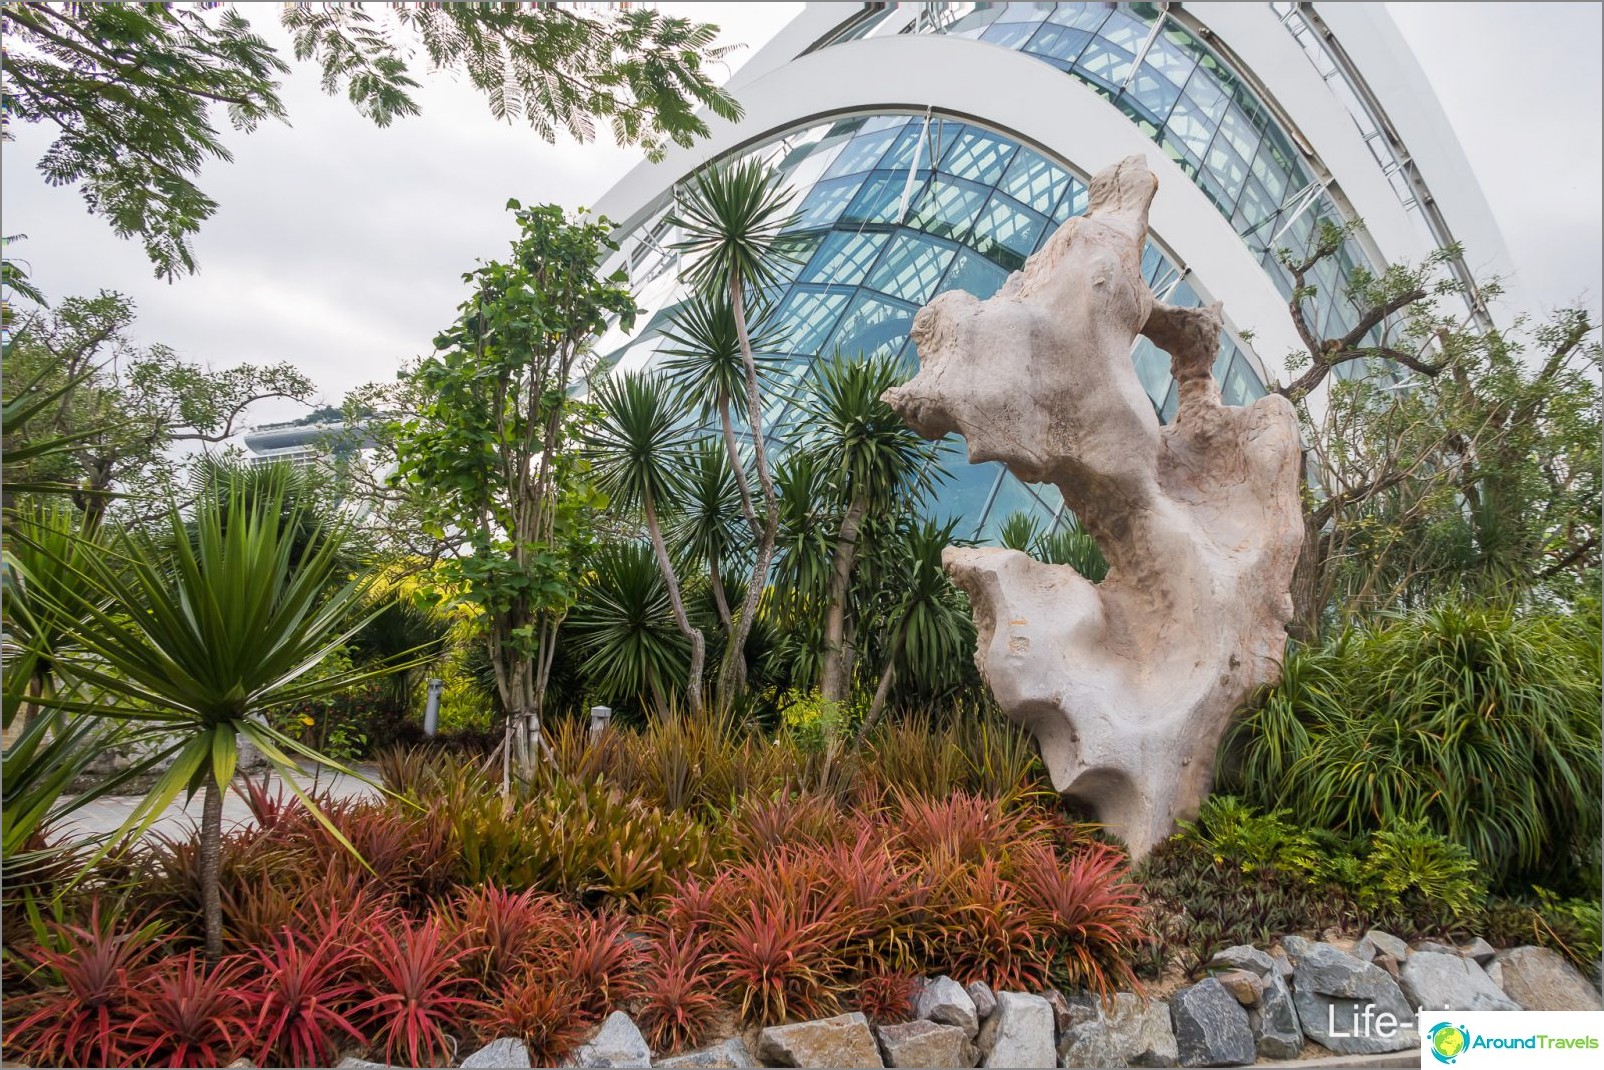 Gardens by the Bay in Singapore is the main attraction